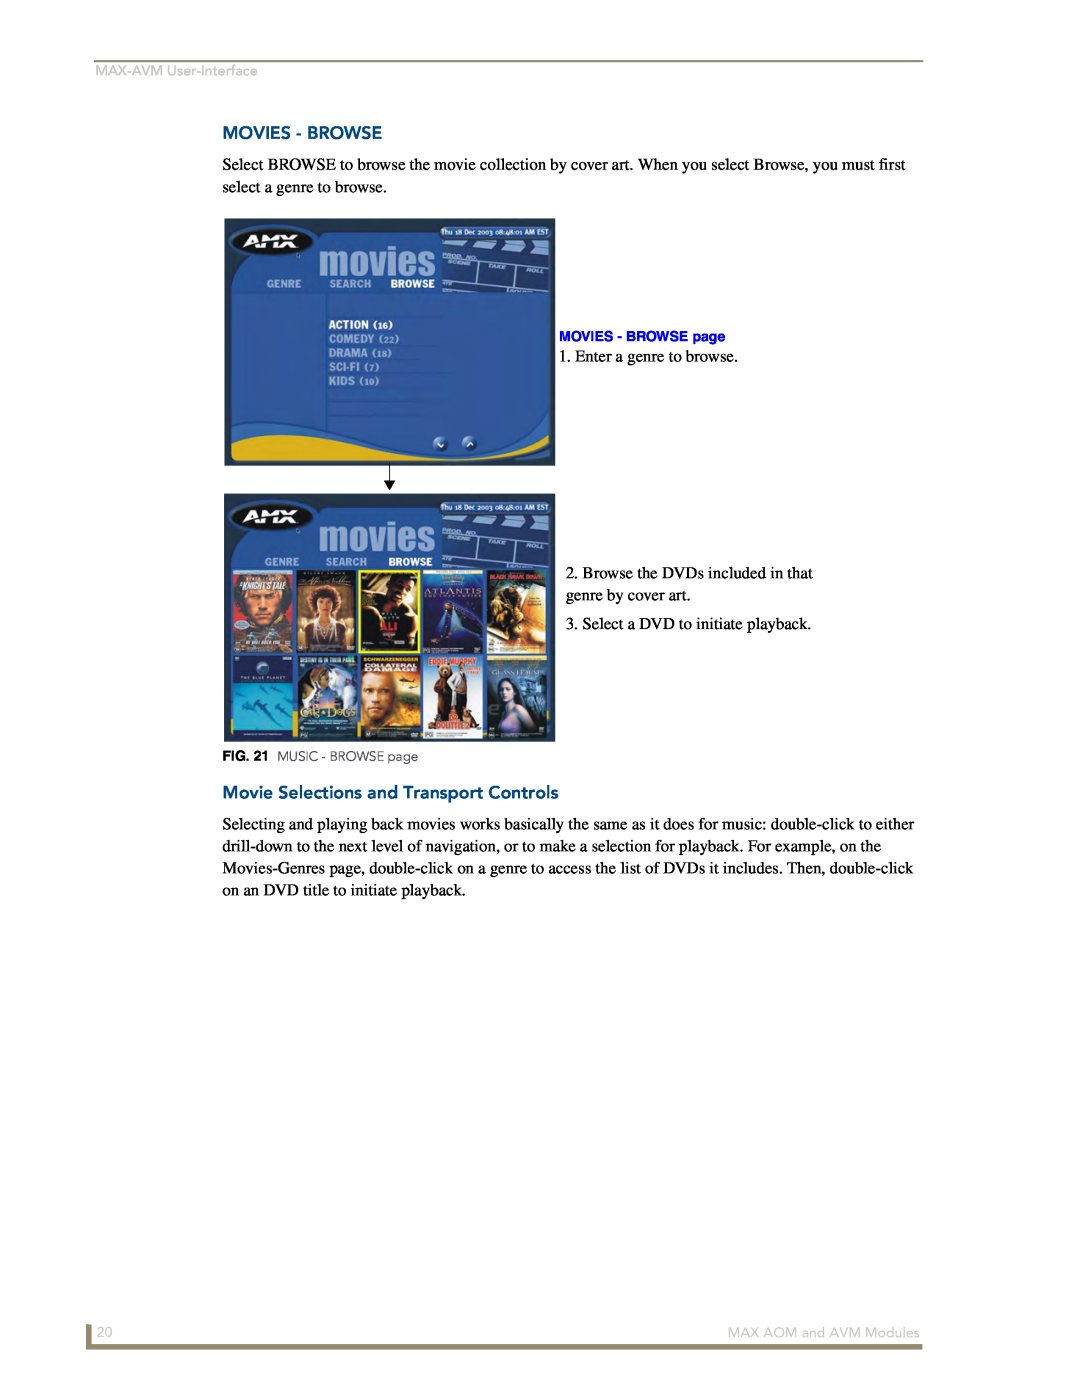 AMX MAX-AVM manual Movies - Browse, Movie Selections and Transport Controls, Enter a genre to browse 